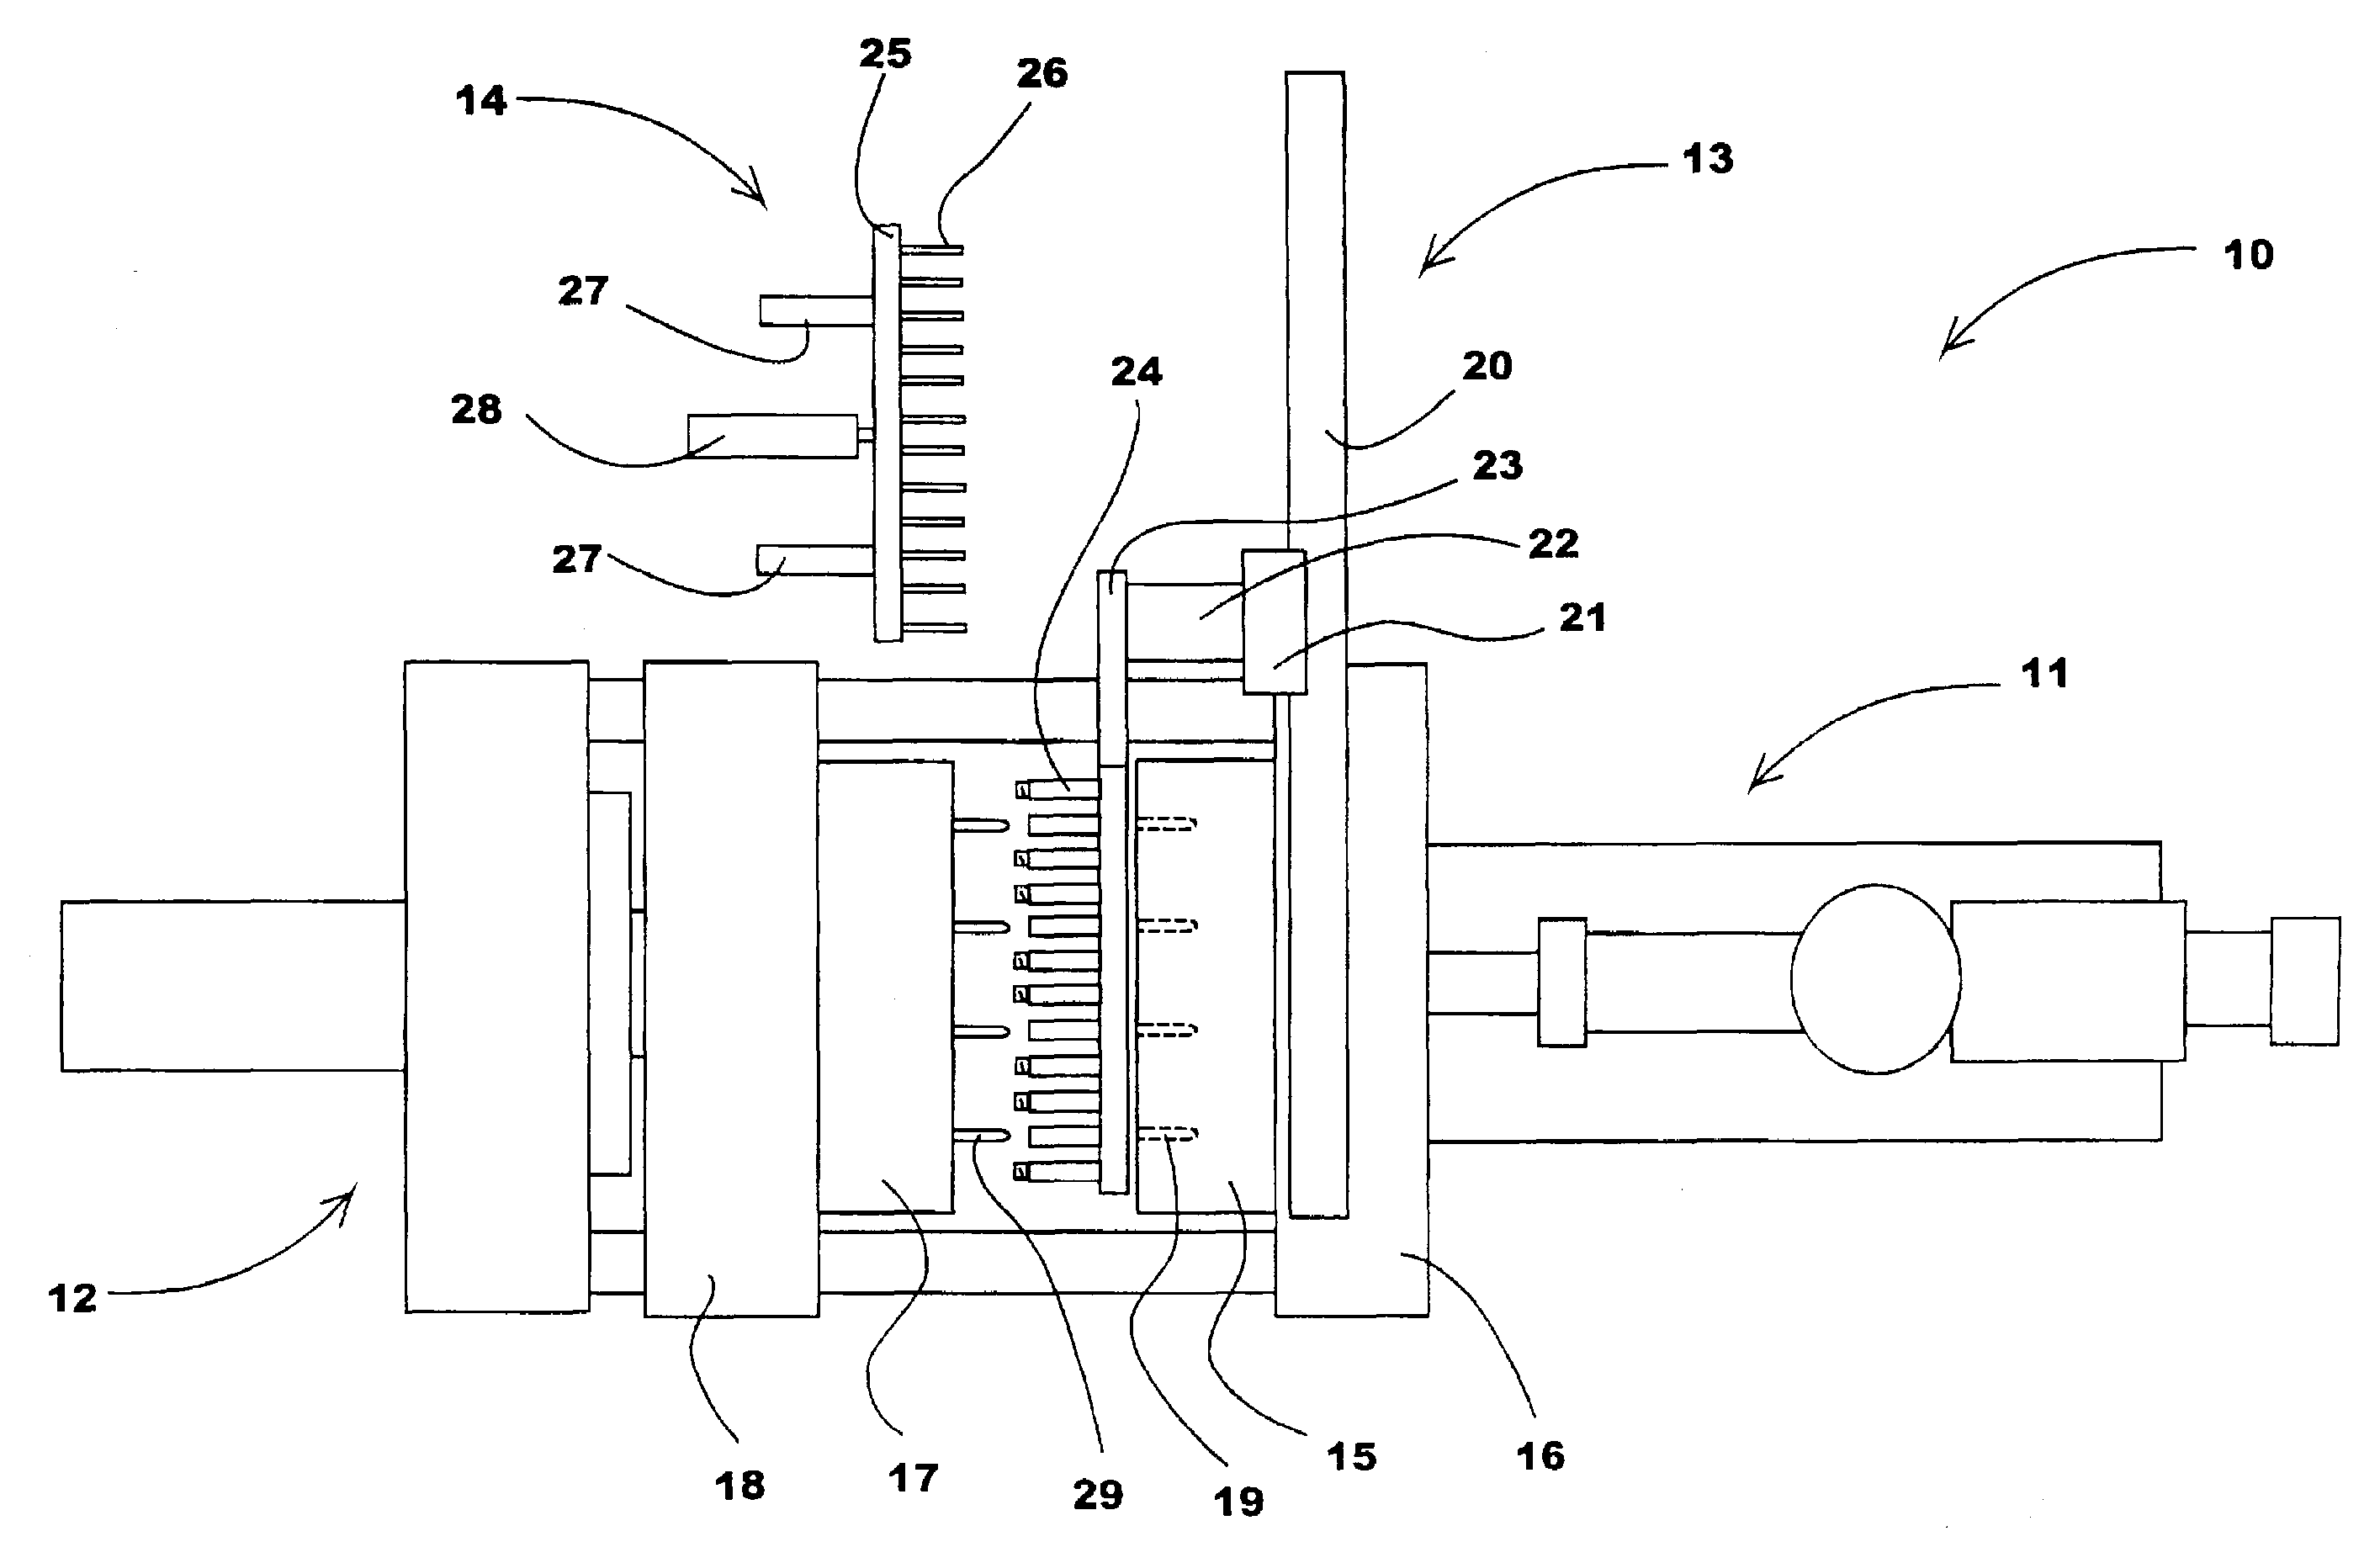 Platen mounted post mold cooling apparatus and method